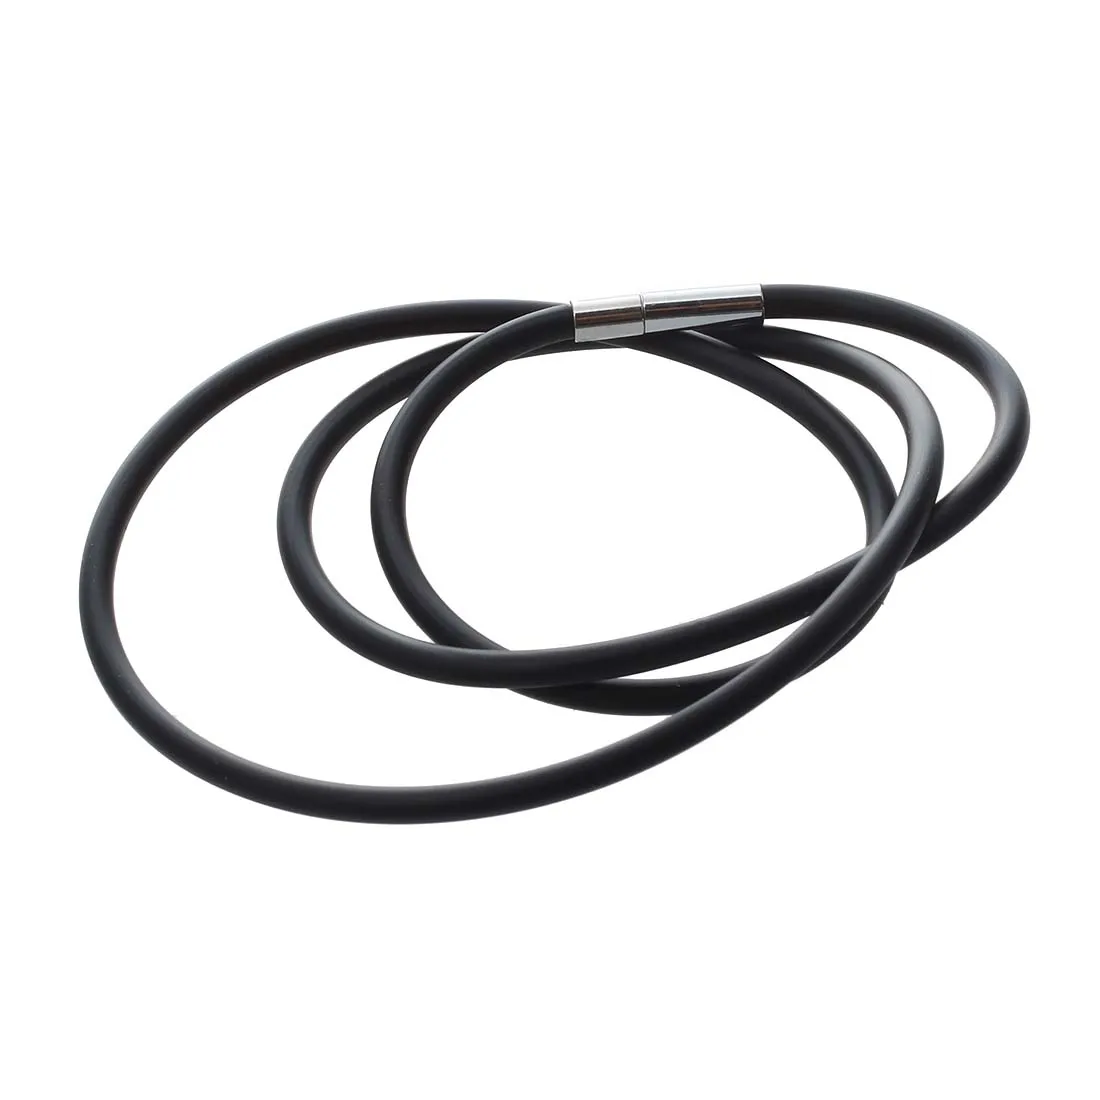 

19.75 Inch 3mm Fashion Rubber Cord Necklace with Stainless Steel Closure - Black